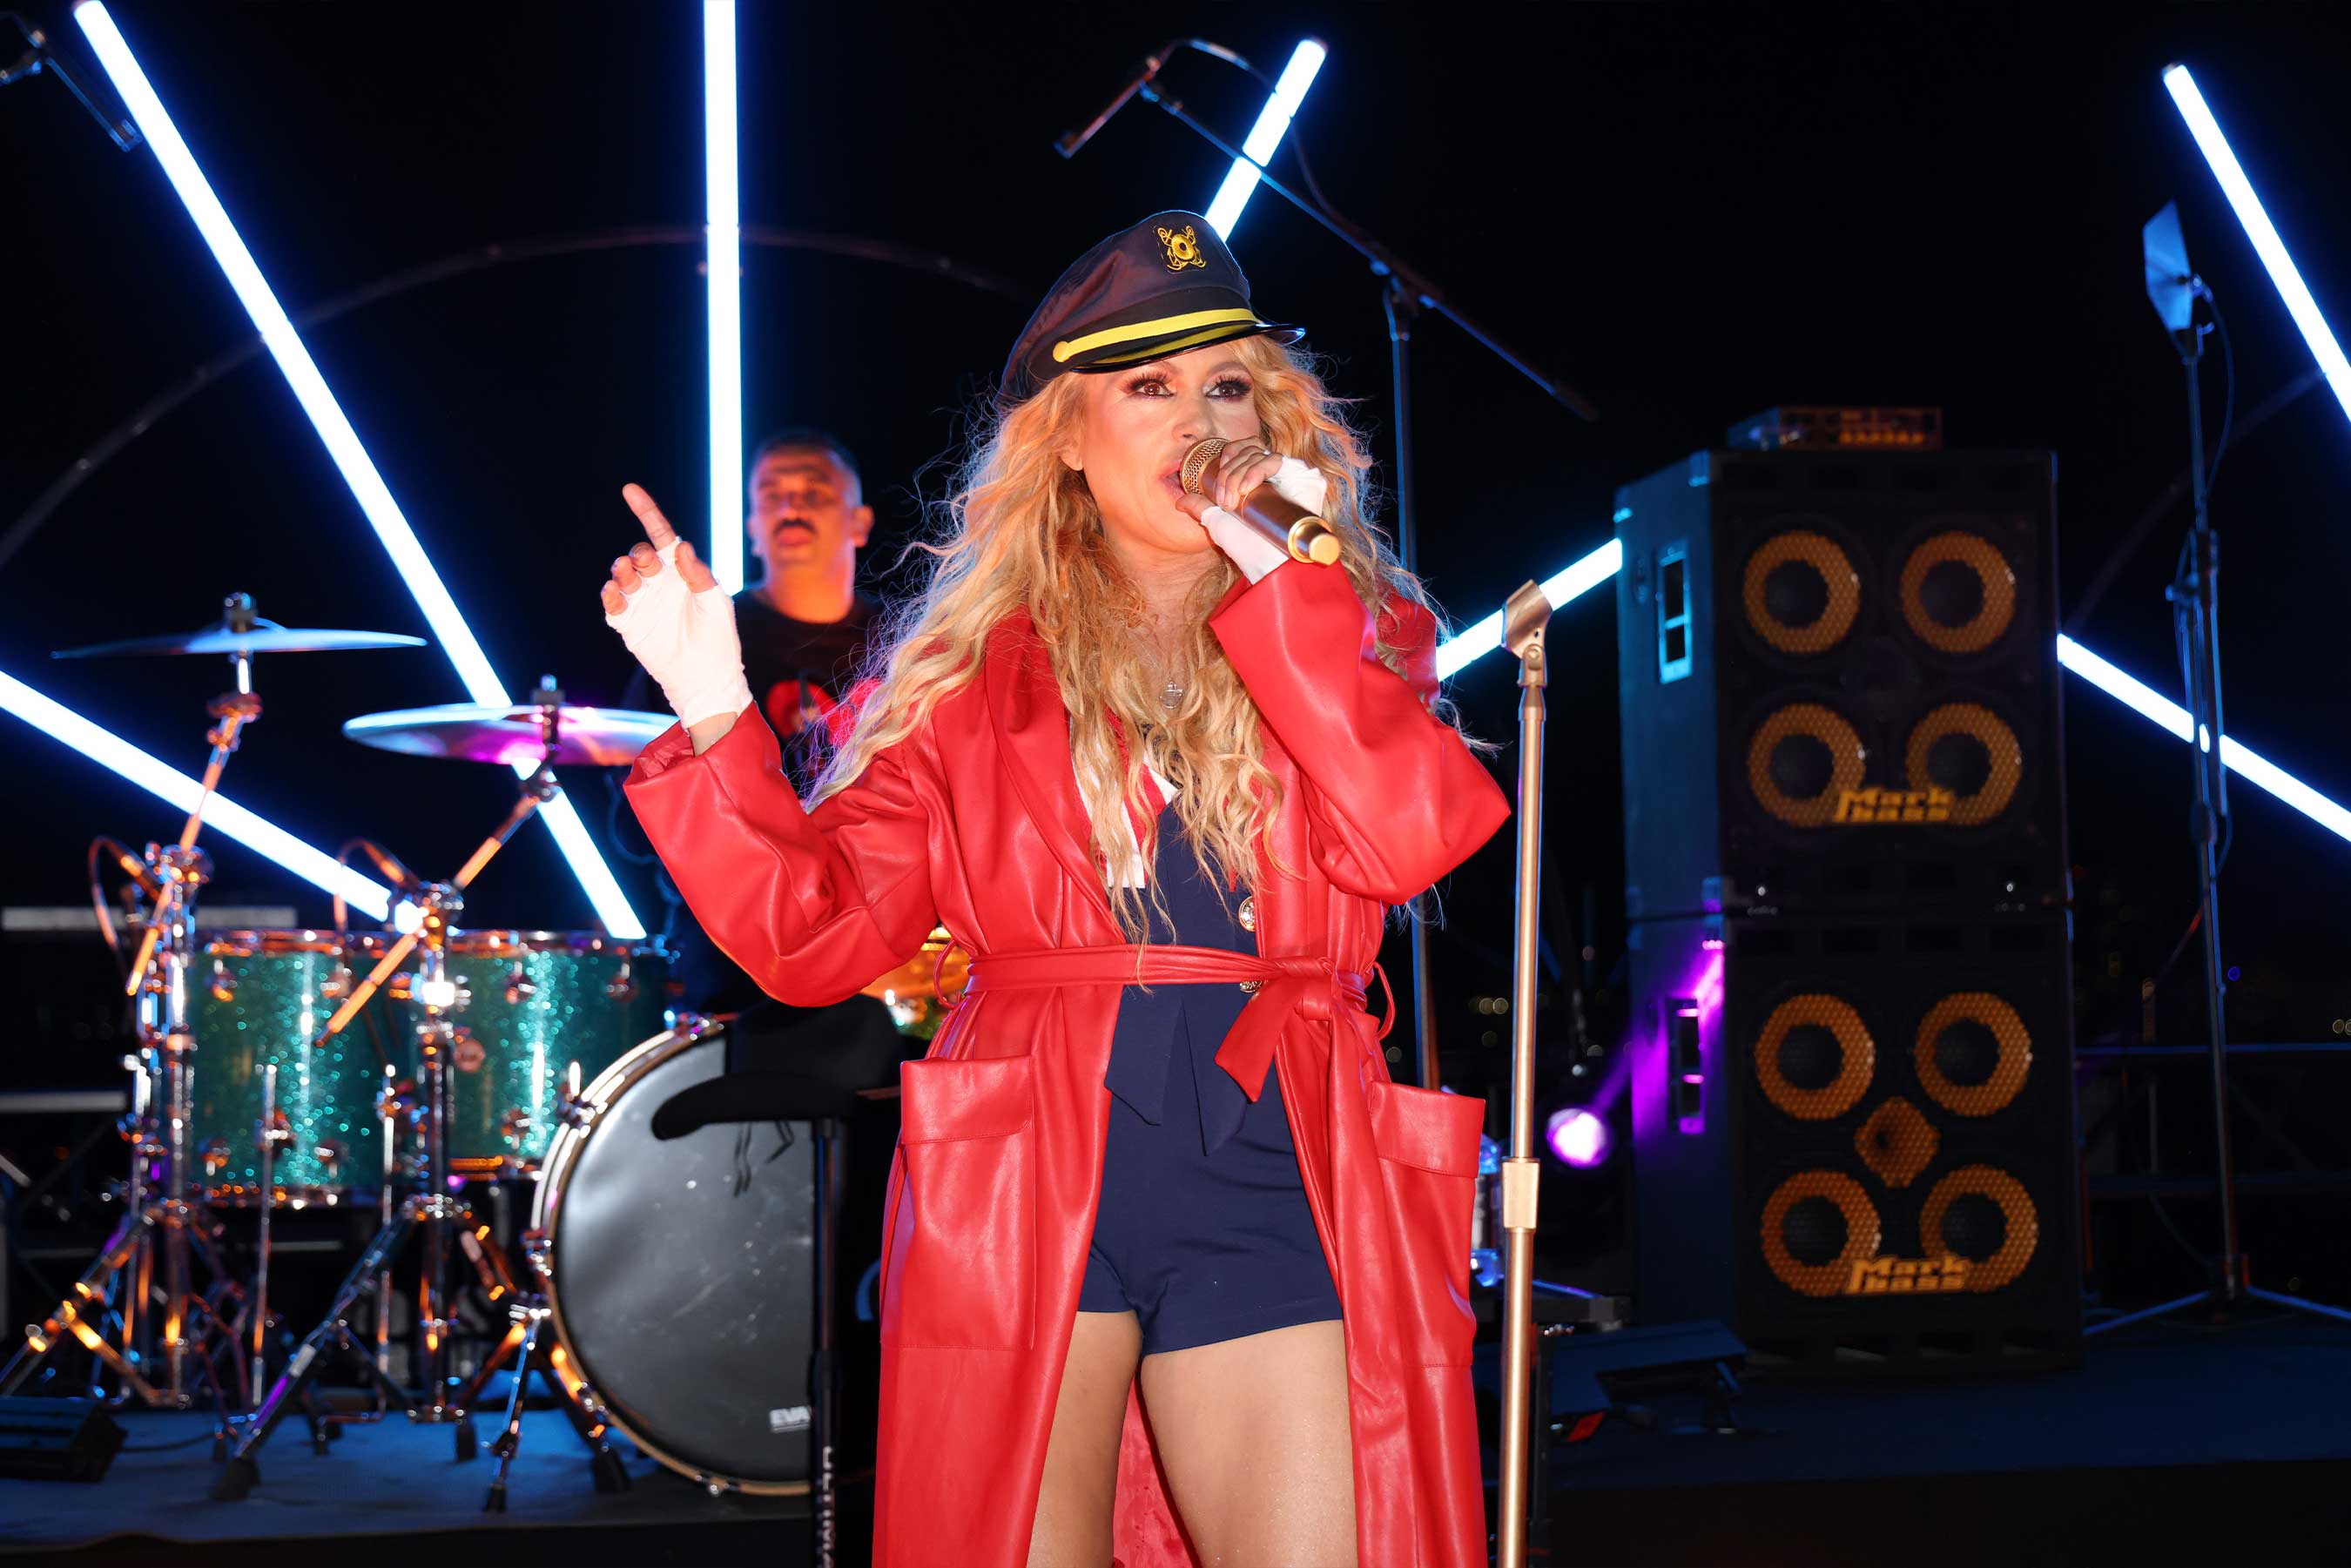 Paulina Rubio, the Queen of Latin Pop, referred to by Rolling Stone magazine as like the ‘Madonna of America’, delivers a show-stopping performance in Miami at the christening event of NCL’s newest groundbreaking ship, Norwegian Viva.